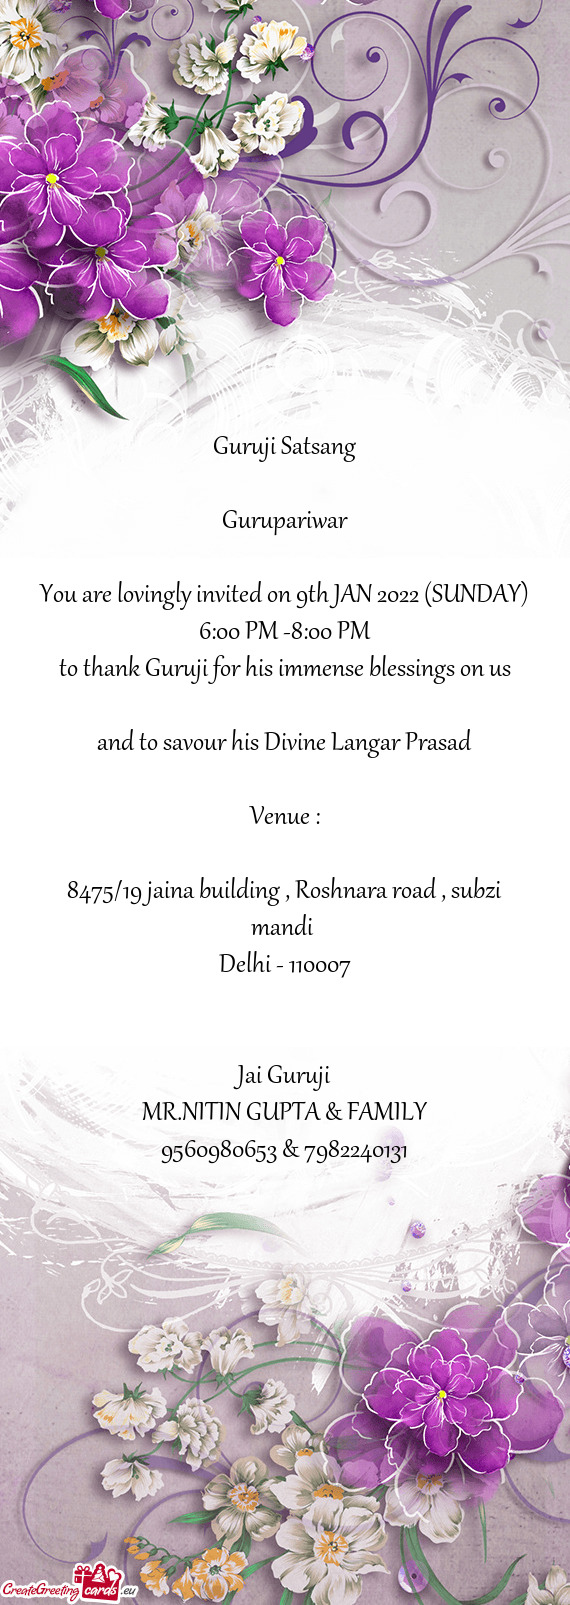 You are lovingly invited on 9th JAN 2022 (SUNDAY) 6:00 PM -8:00 PM